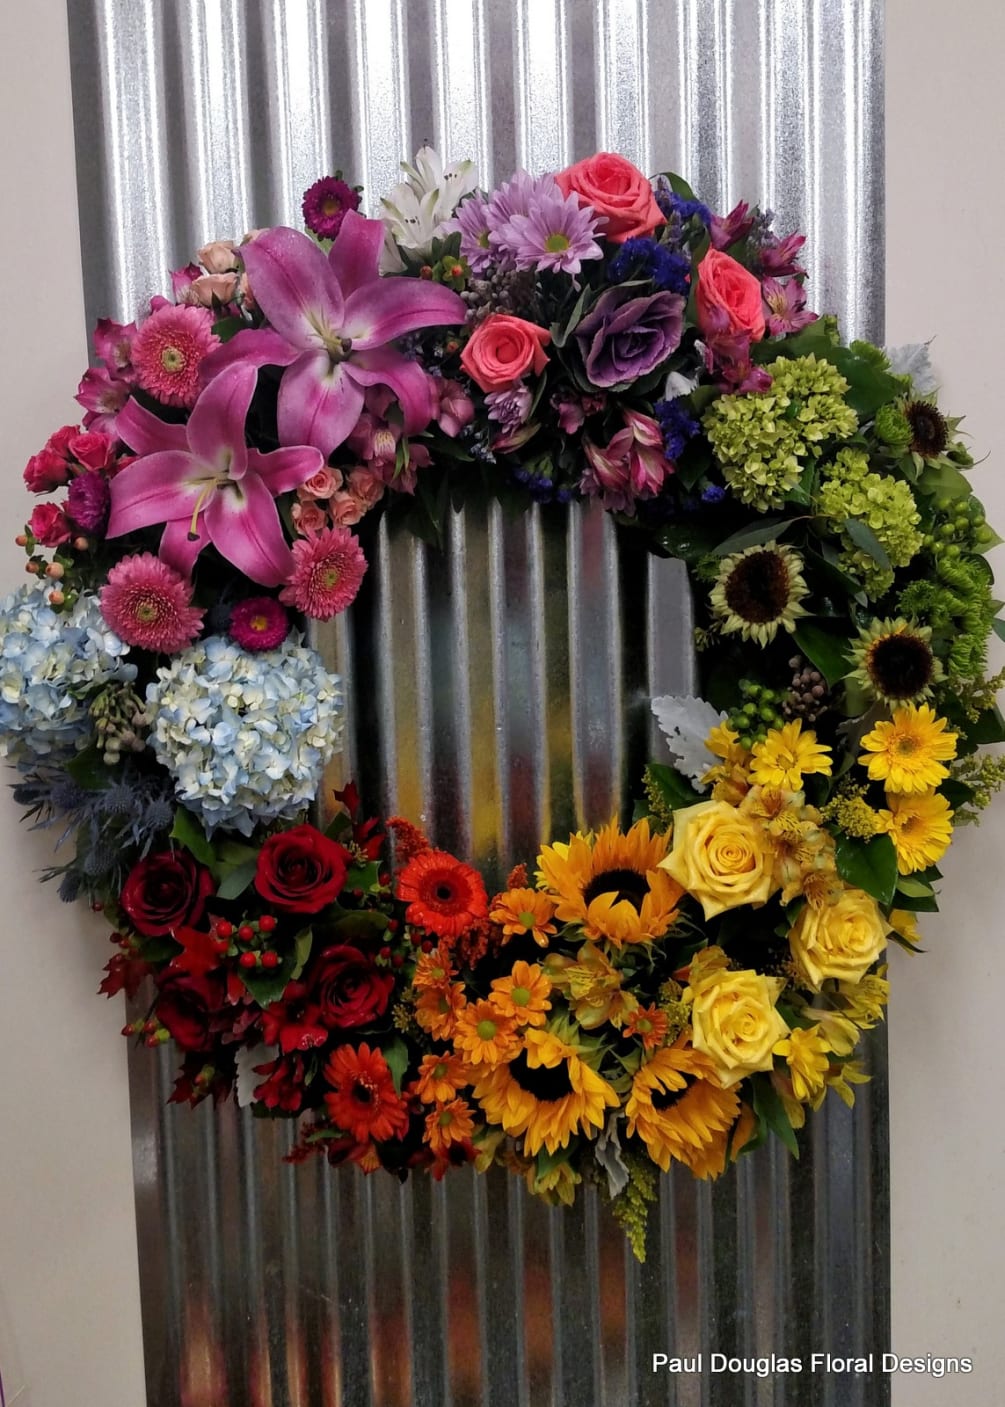 A tribute wreath designed with a color pallet that will lift a